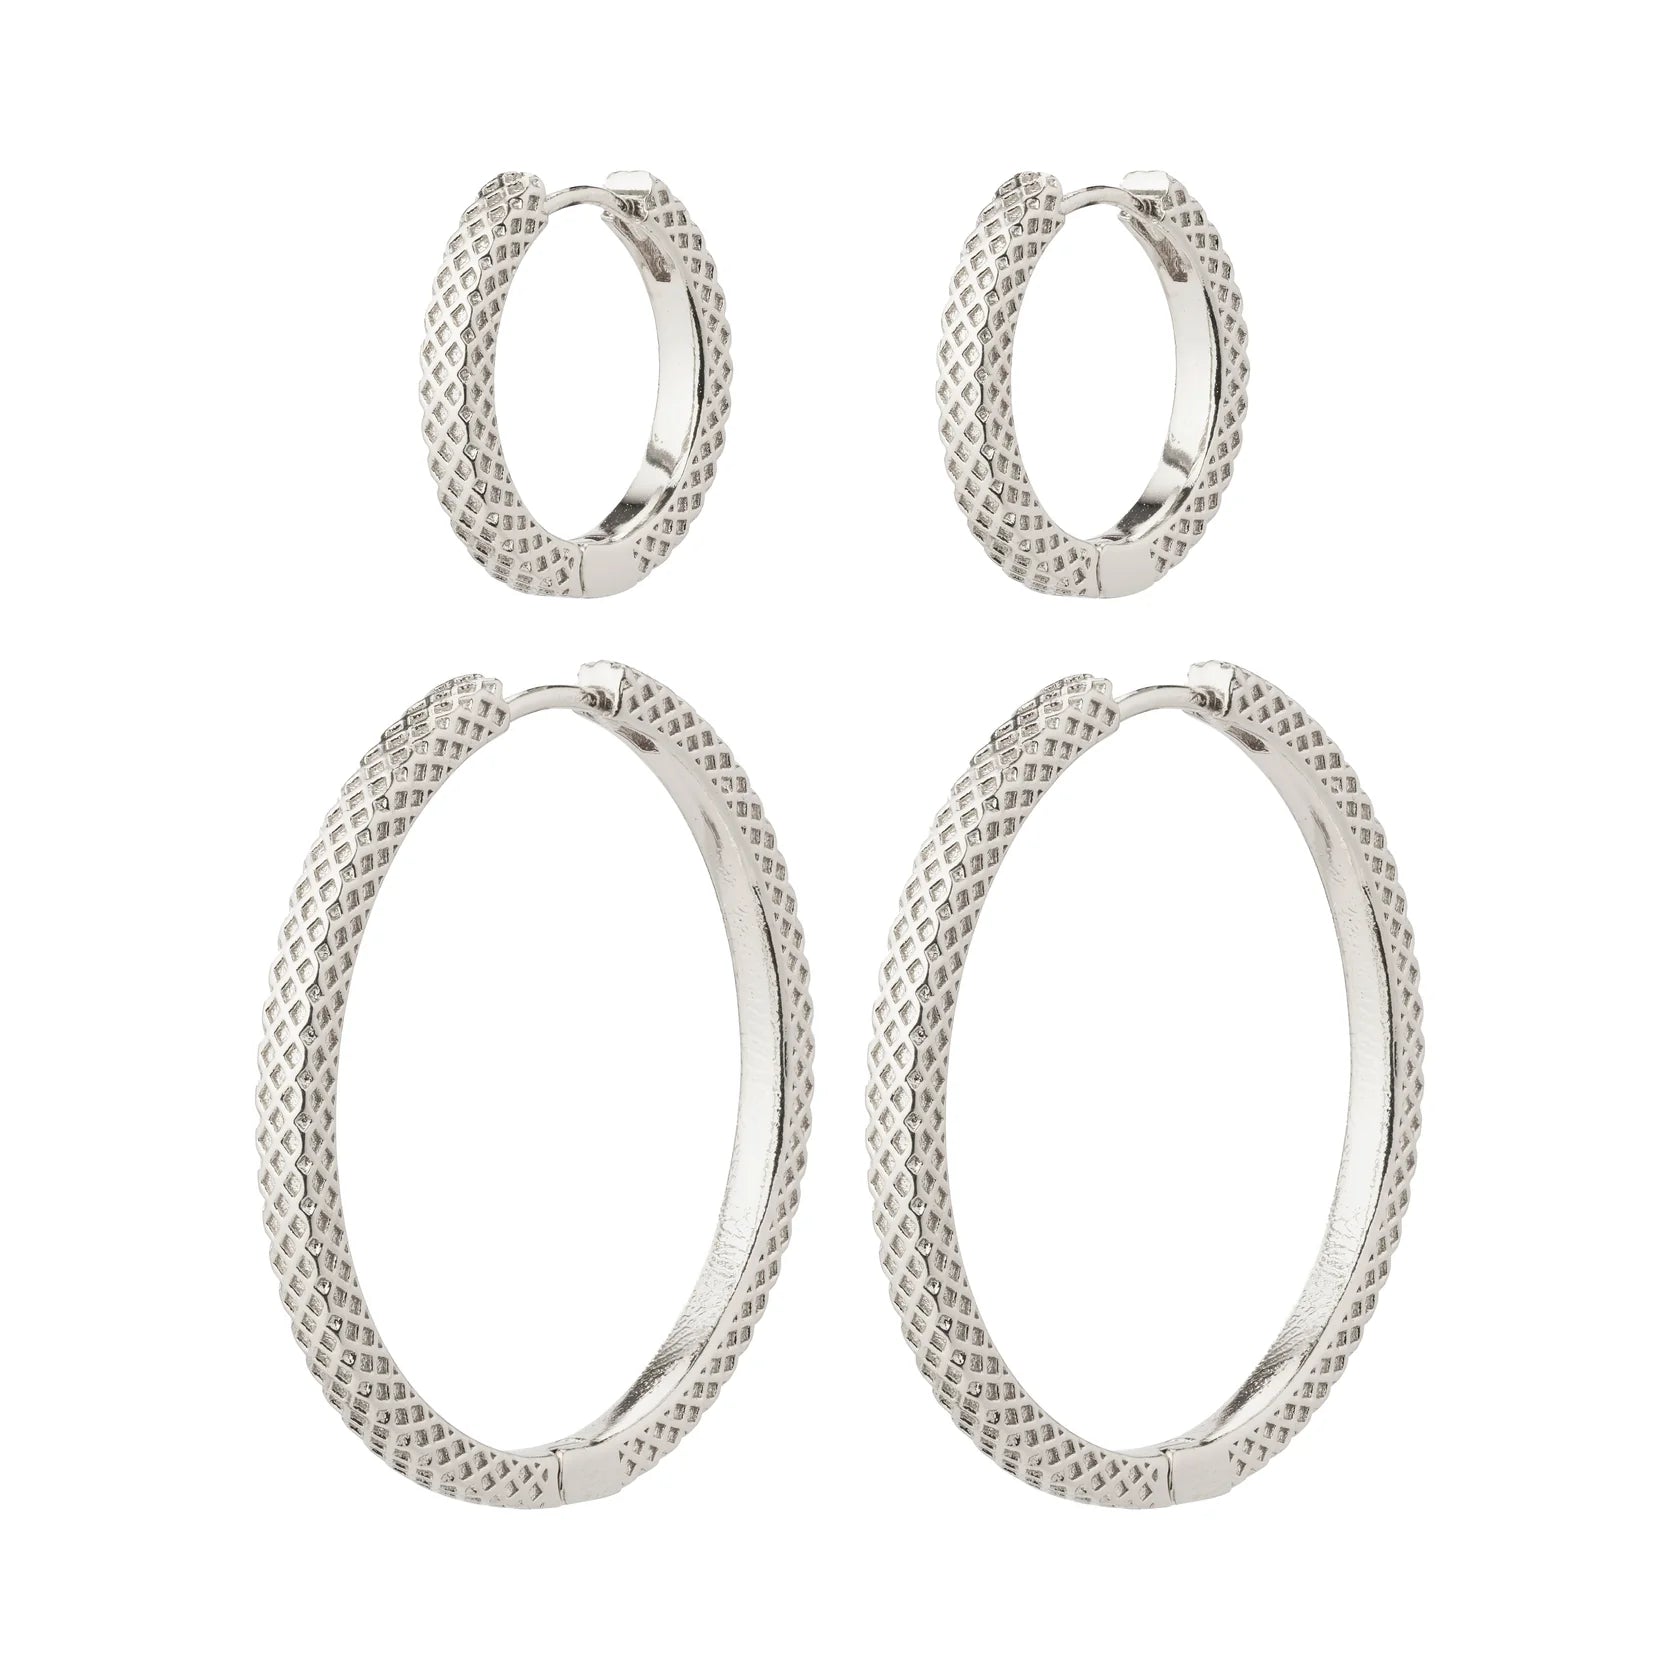 PULSE recycled earrings 2-in-1 set / SILVER PLATED